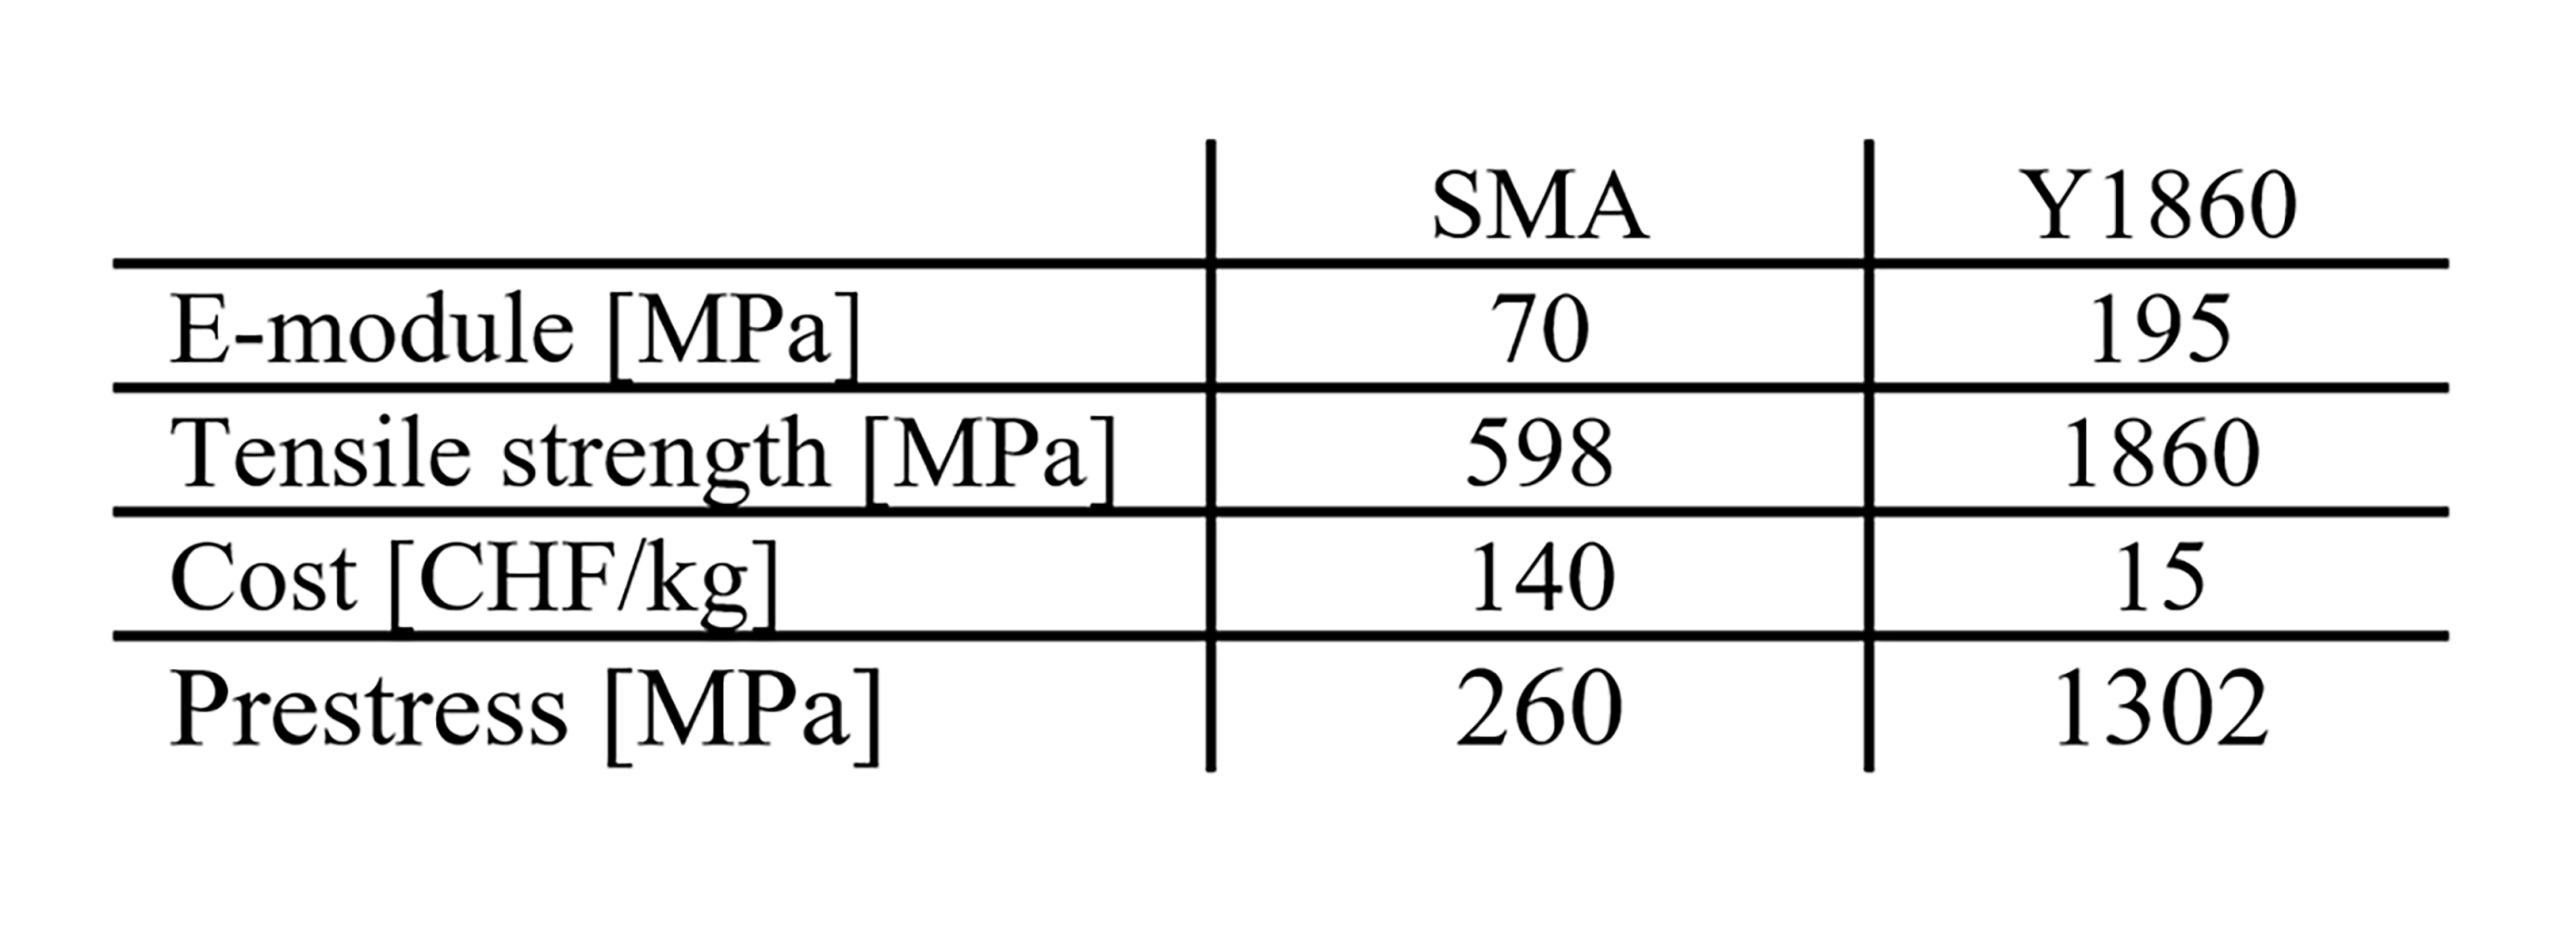 Material properties and costs of SMA and Y1860